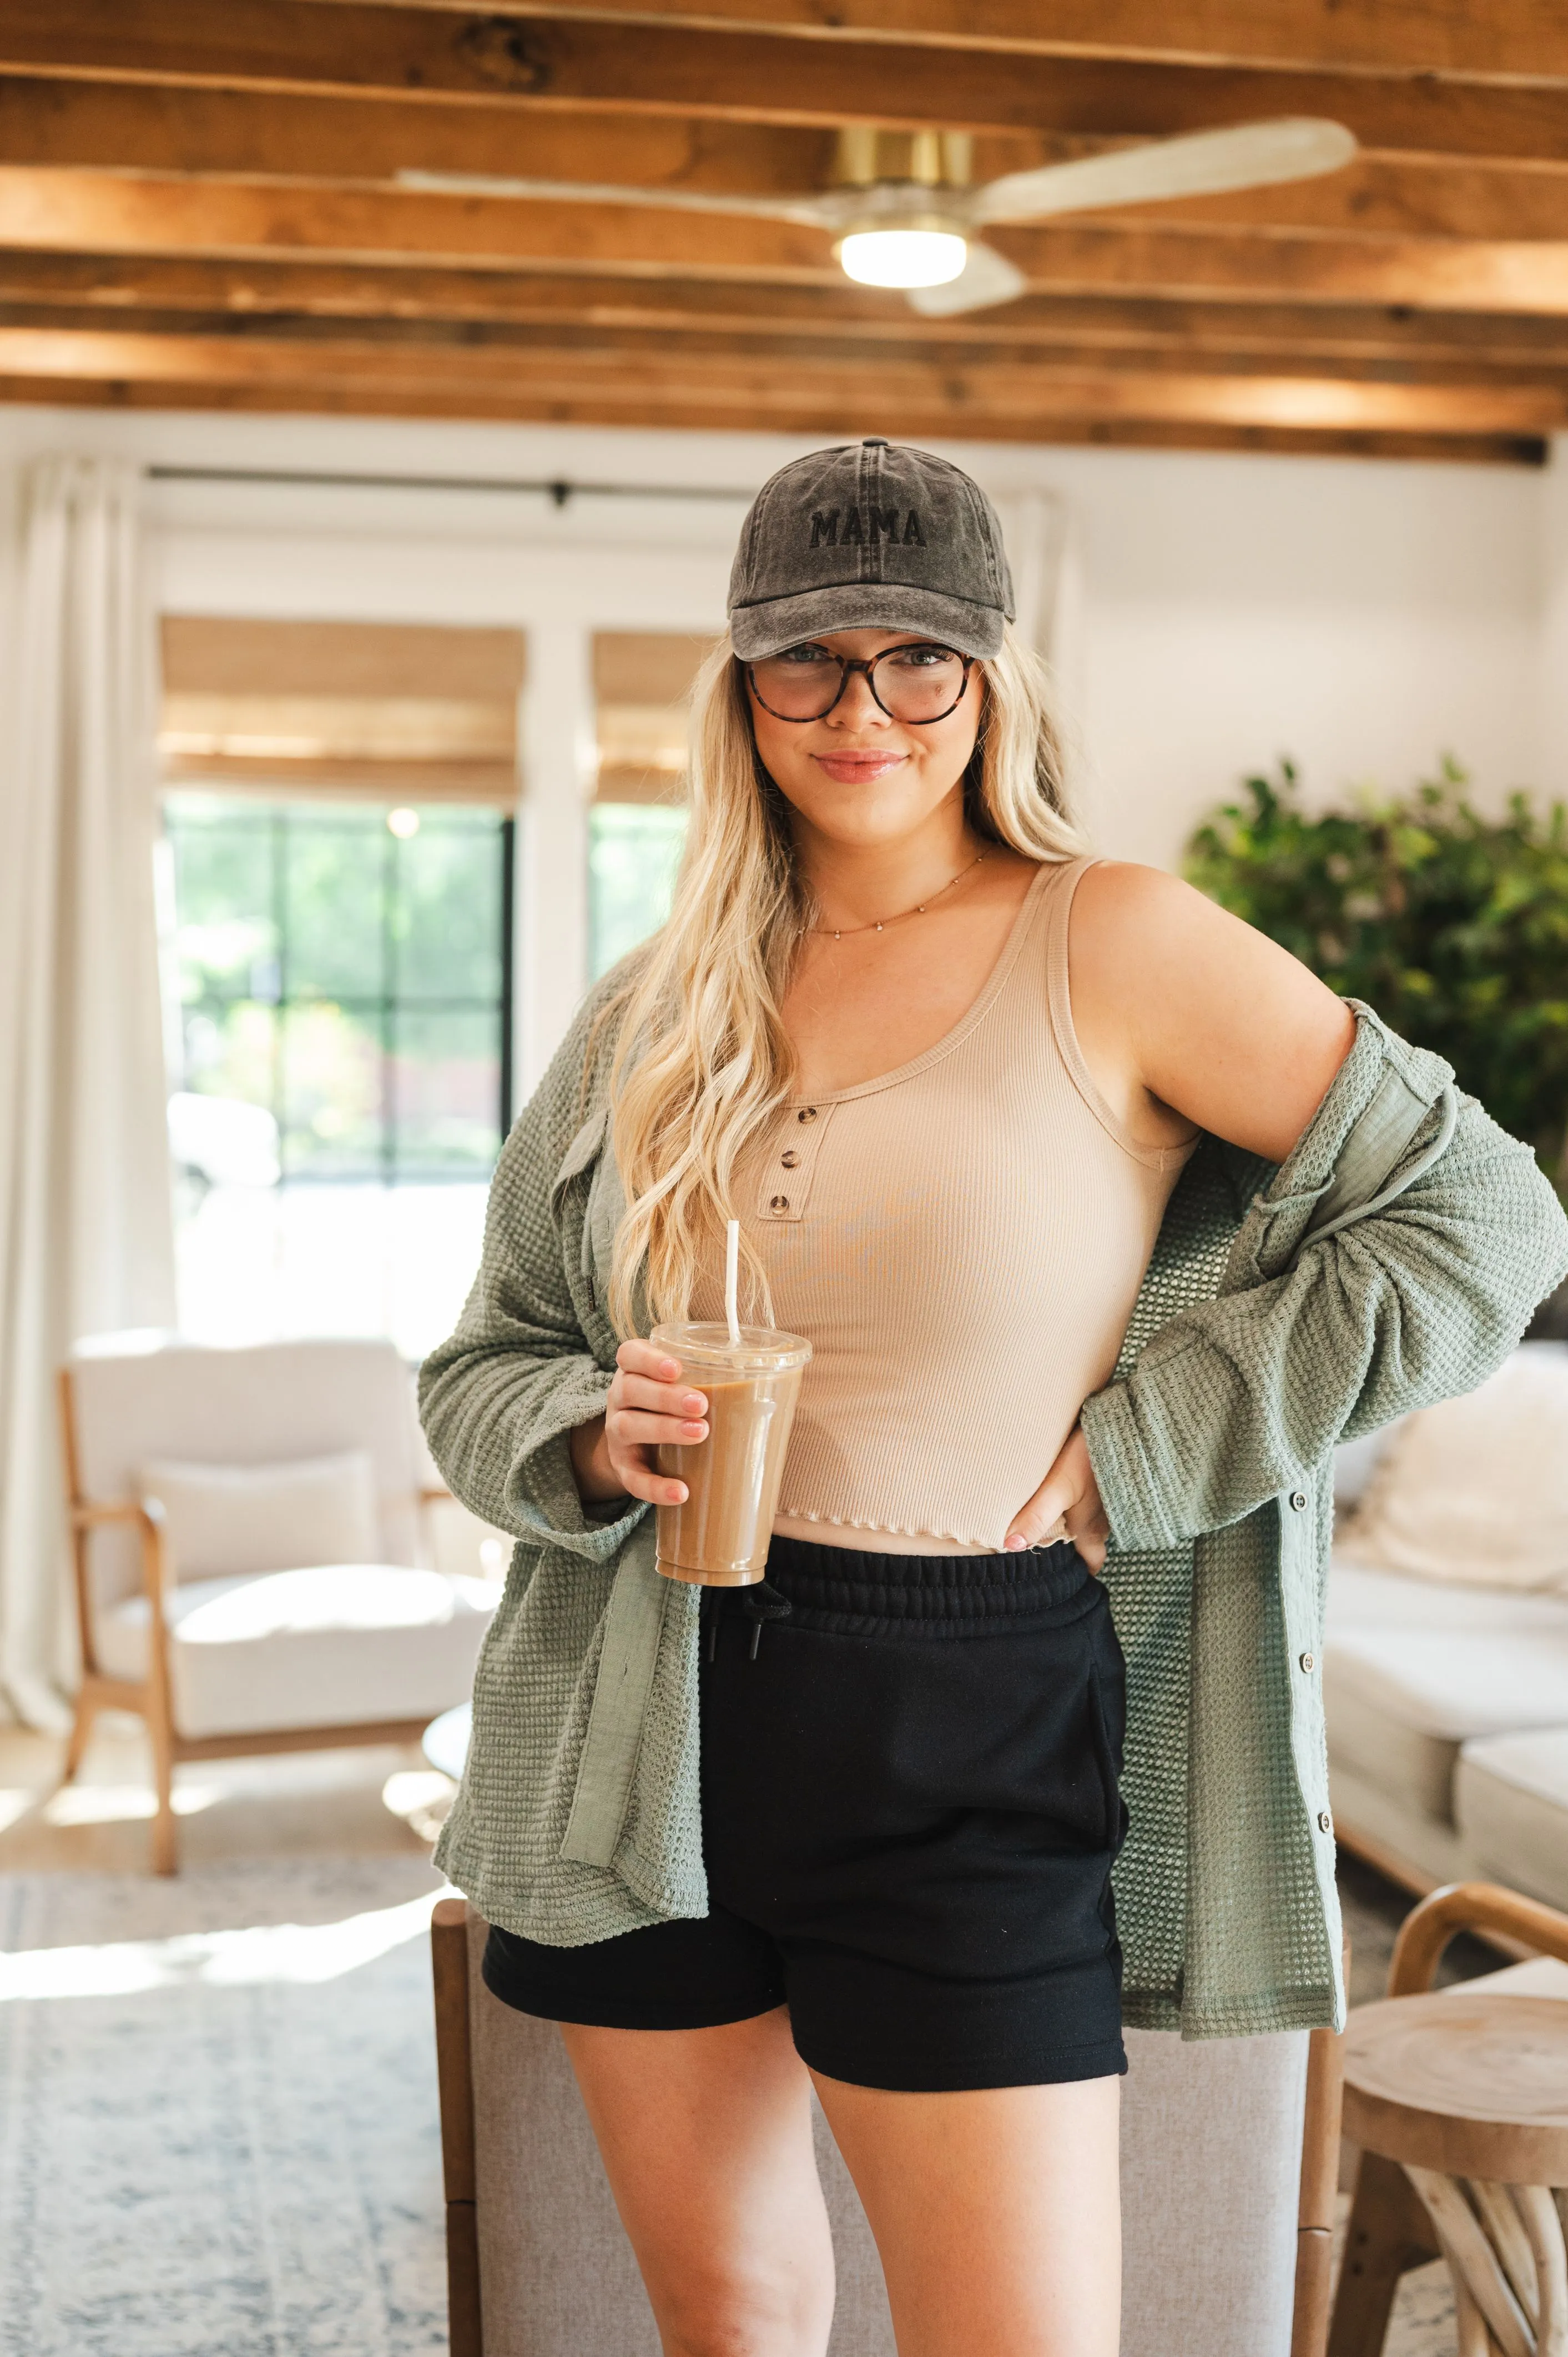 Smiling woman standing indoors wearing a beige tank top, black shorts, green cardigan, and a gray "MAMA" hat, holding an iced coffee drink.